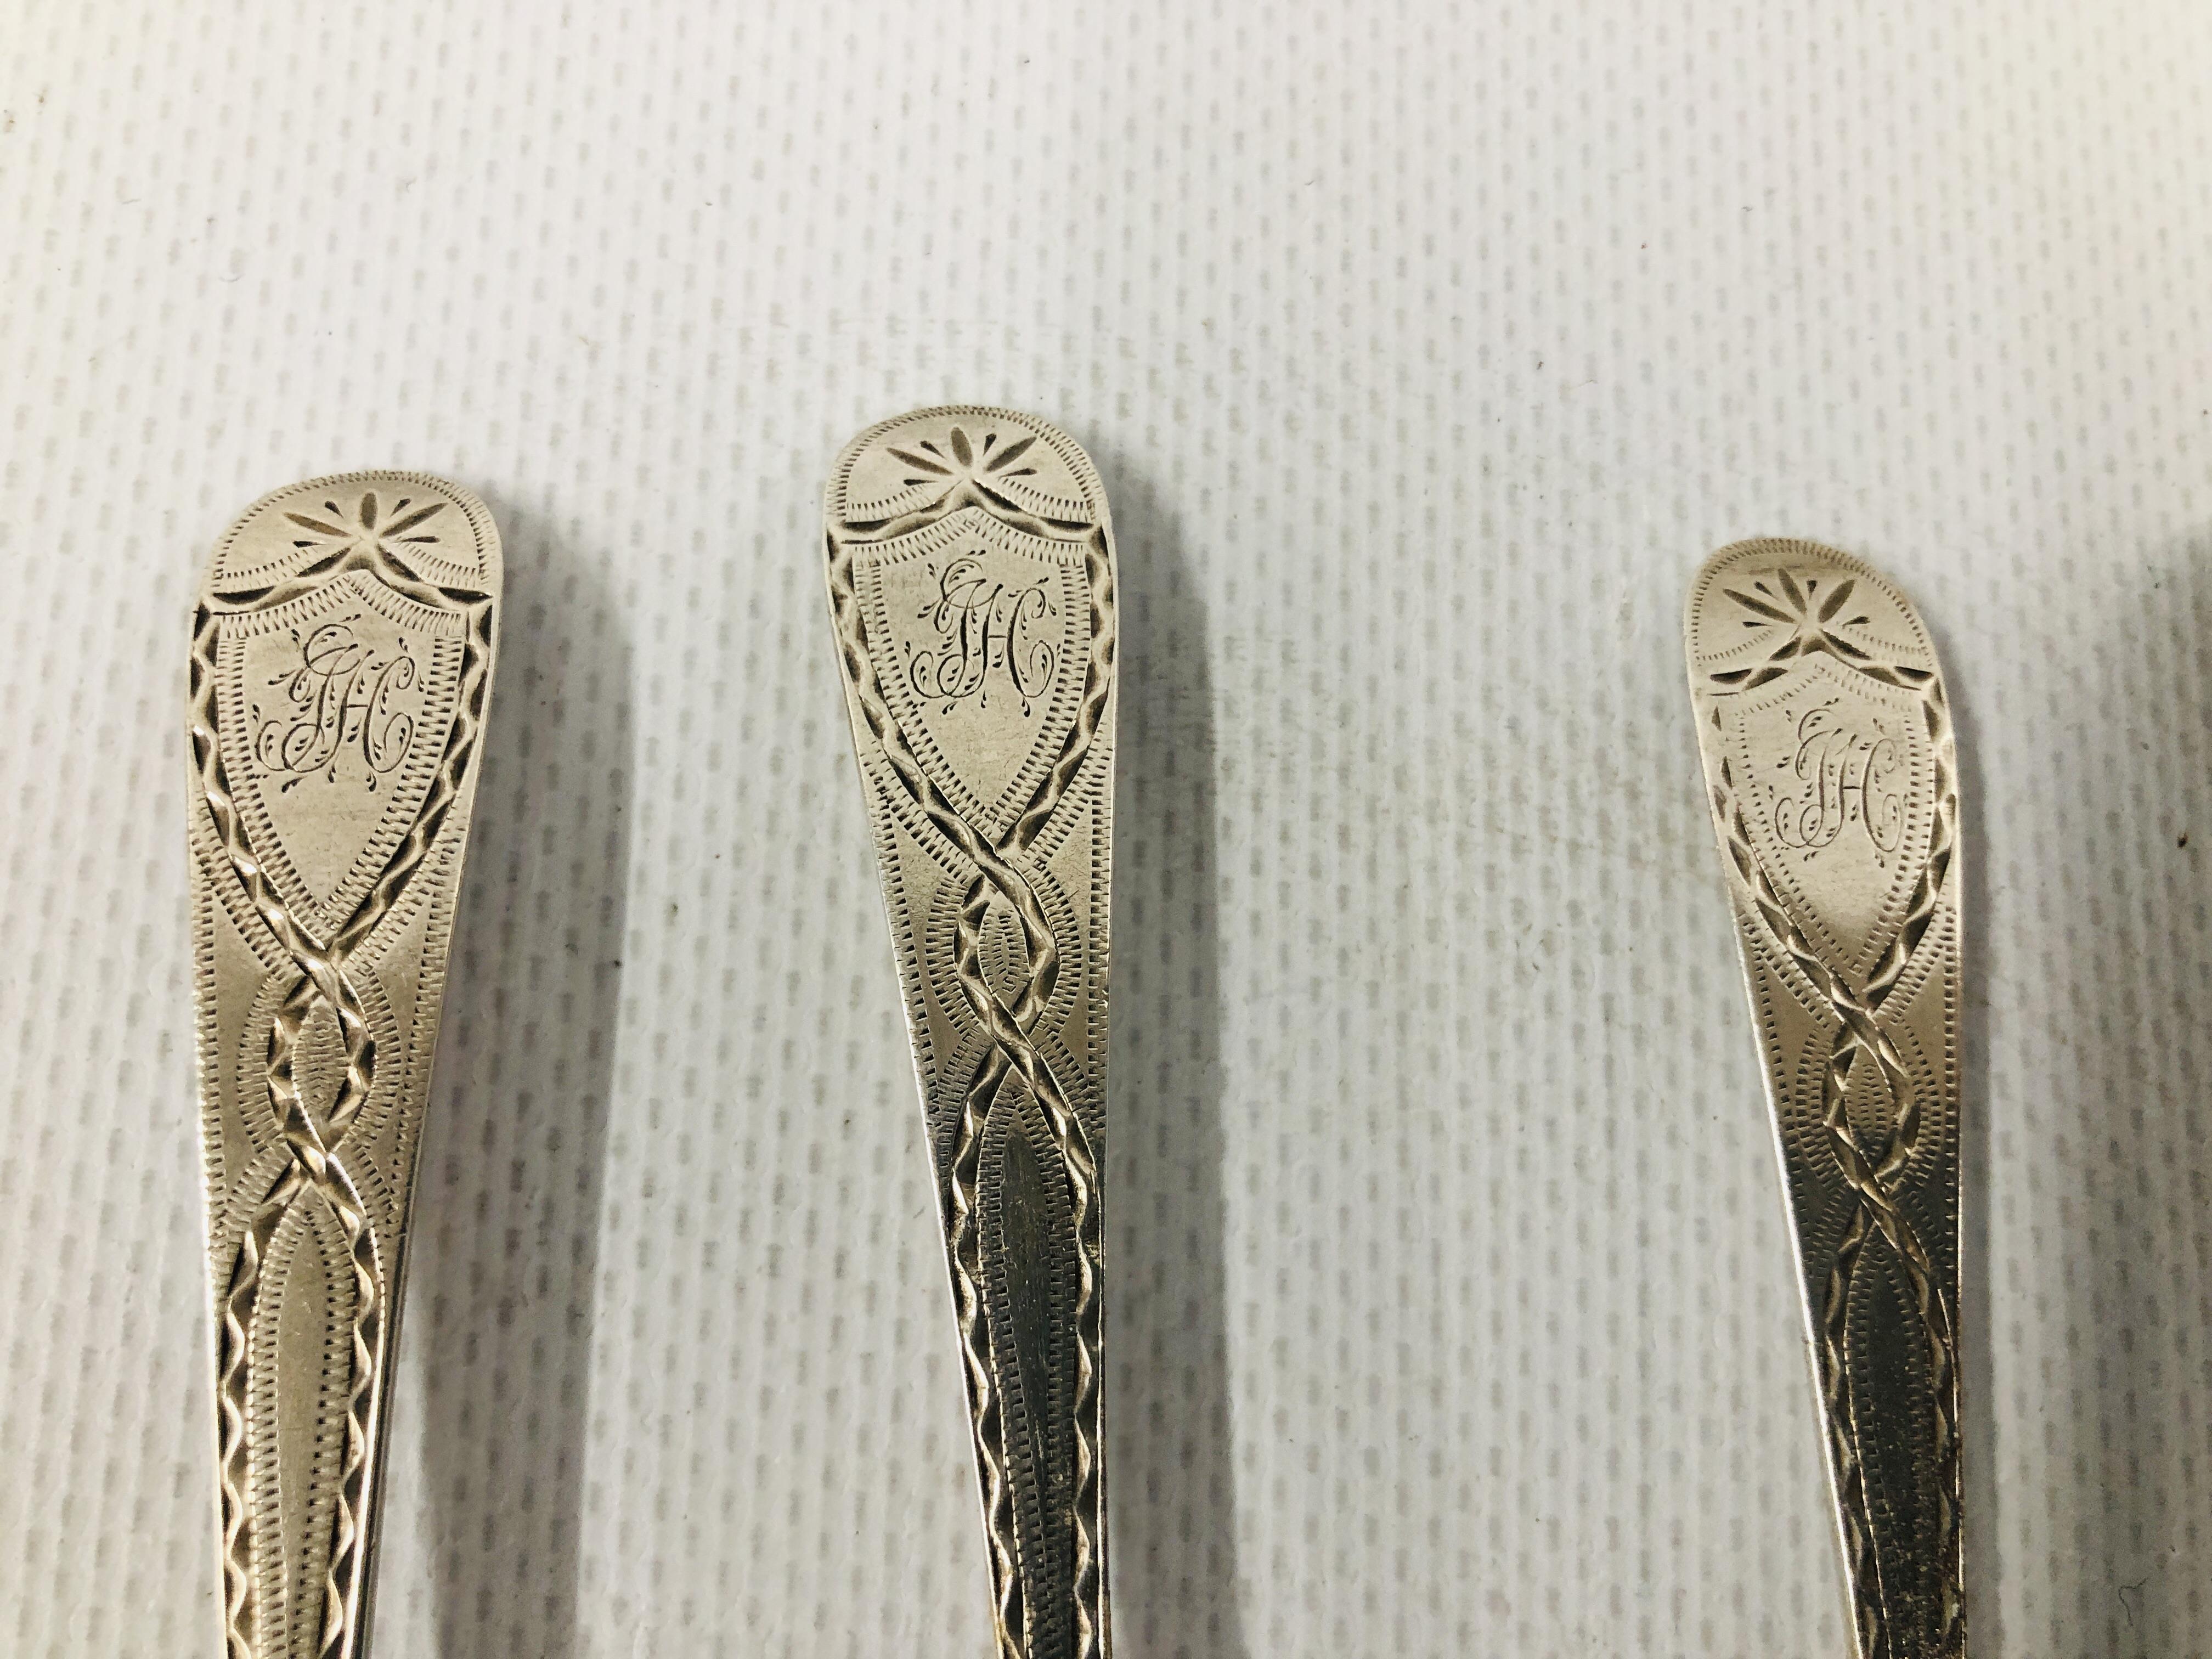 SET OF SIX SILVER GEORGE IV BRIGHT CUT TEA SPOONS, c1810. - Image 3 of 9